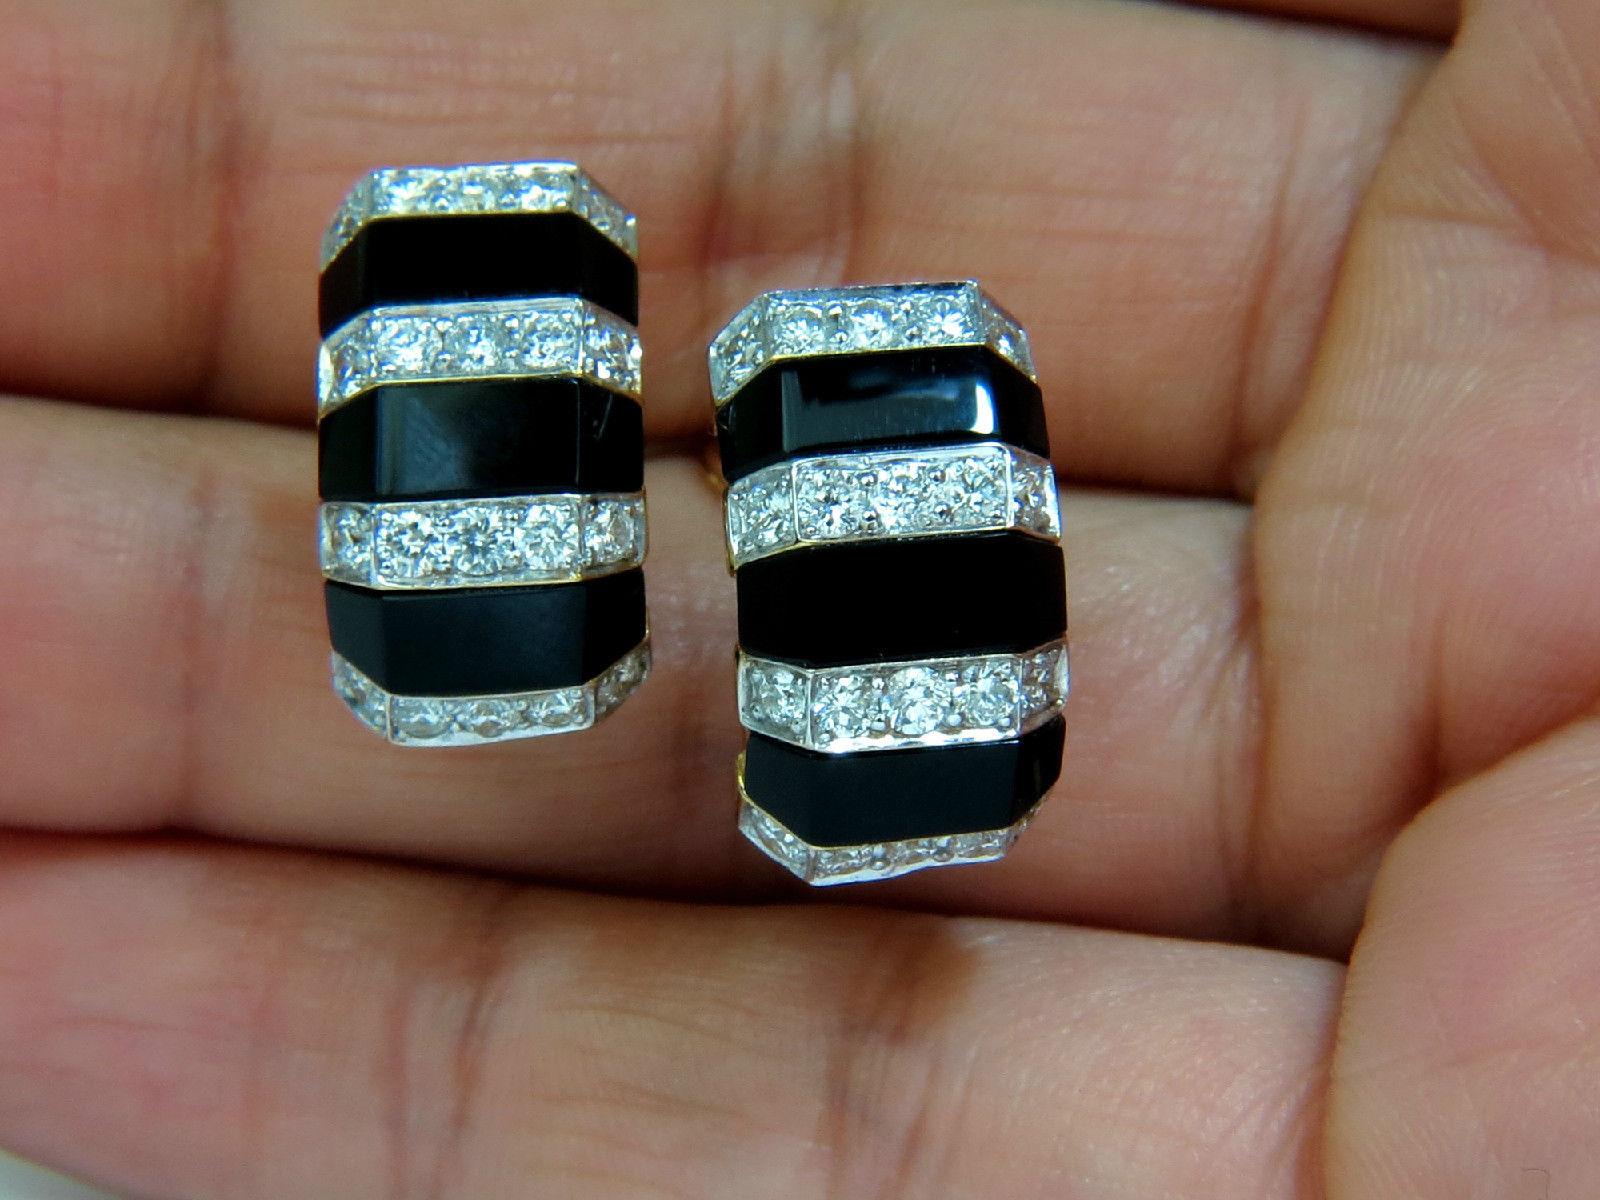 Natural Carved Onyx diamond clips.

  1.76ct. Round Brilliant diamonds. 

 Full cuts.

G color Vs-2 clarity. 



11.3 X 19.8mm

 18.4 grams.

14kt. yellow gold.

$6,000 appraisal will accompany